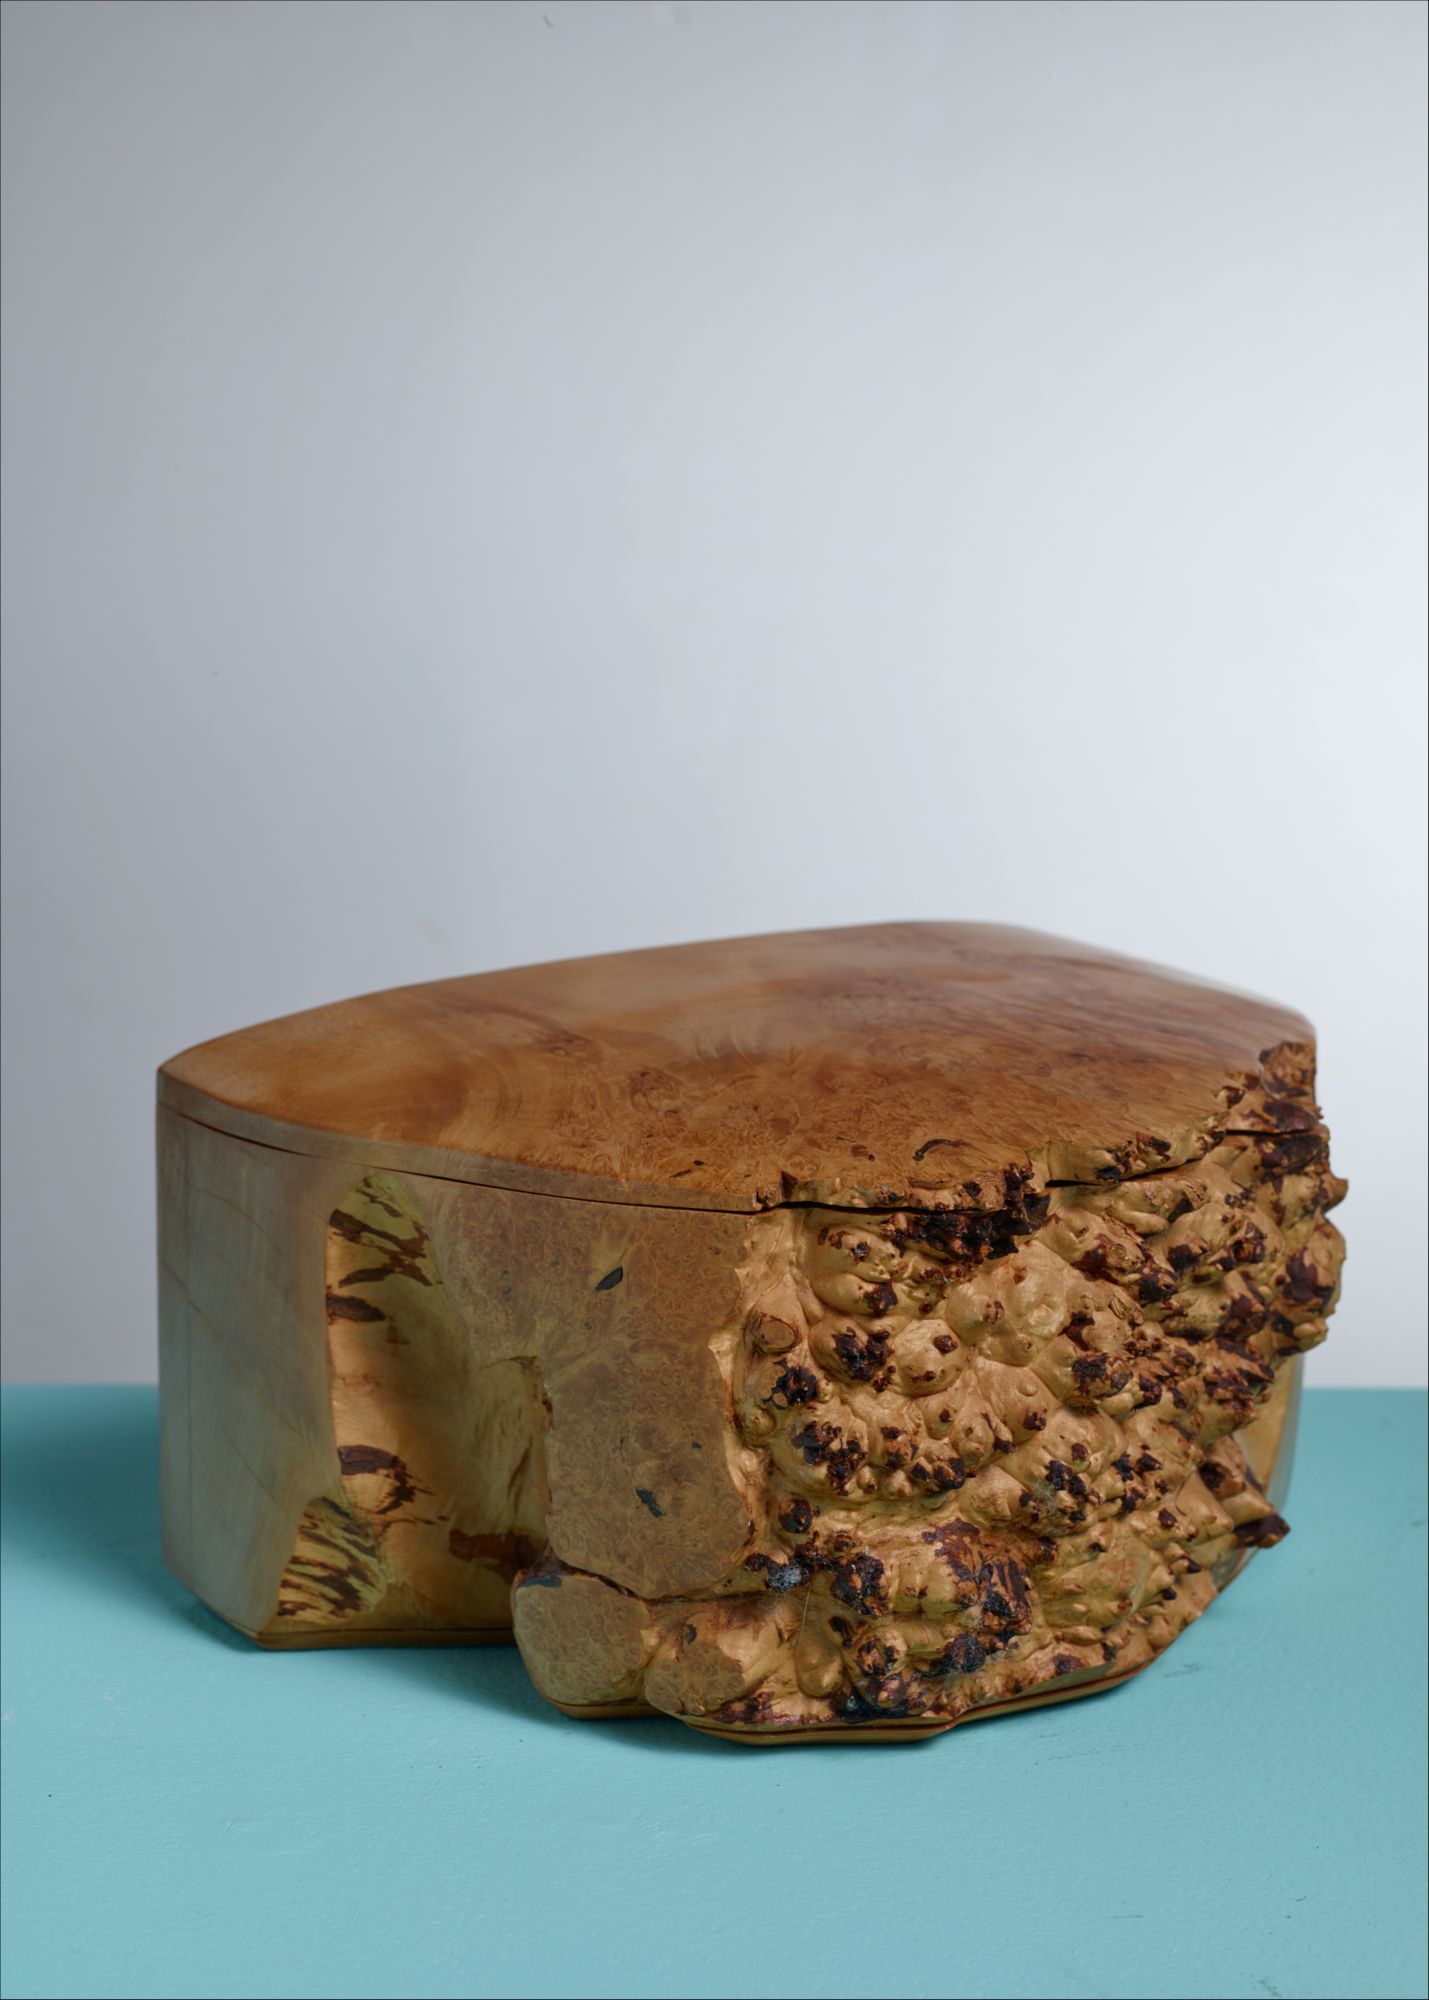 Burl Wood Box With Lid By An American Craftsman